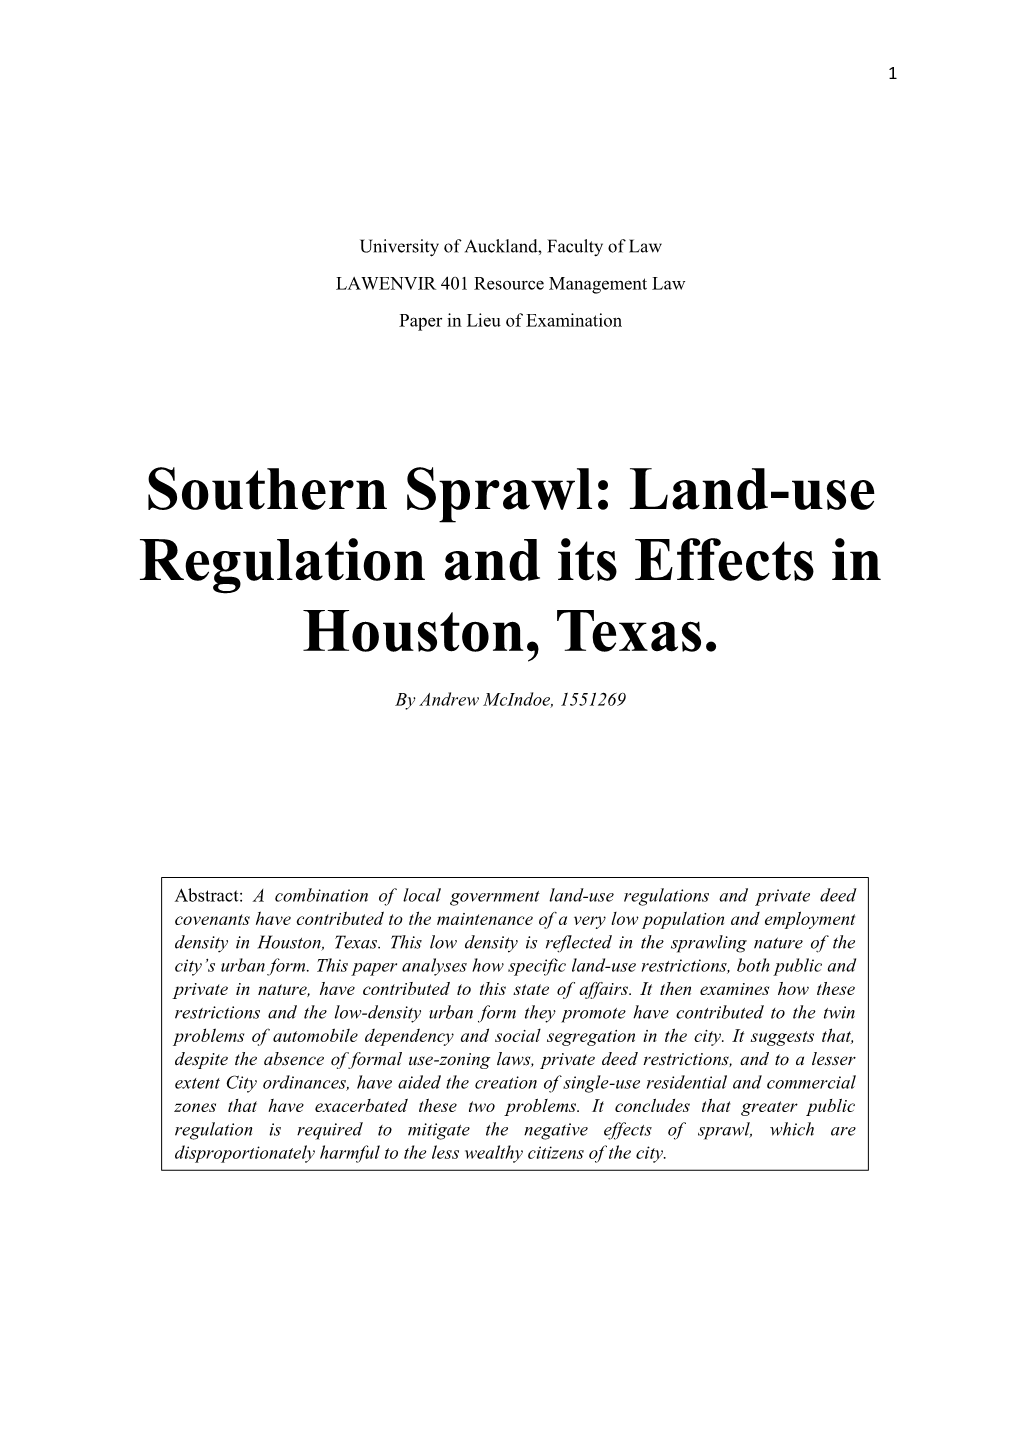 Southern Sprawl: Land-Use Regulation and Its Effects in Houston, Texas